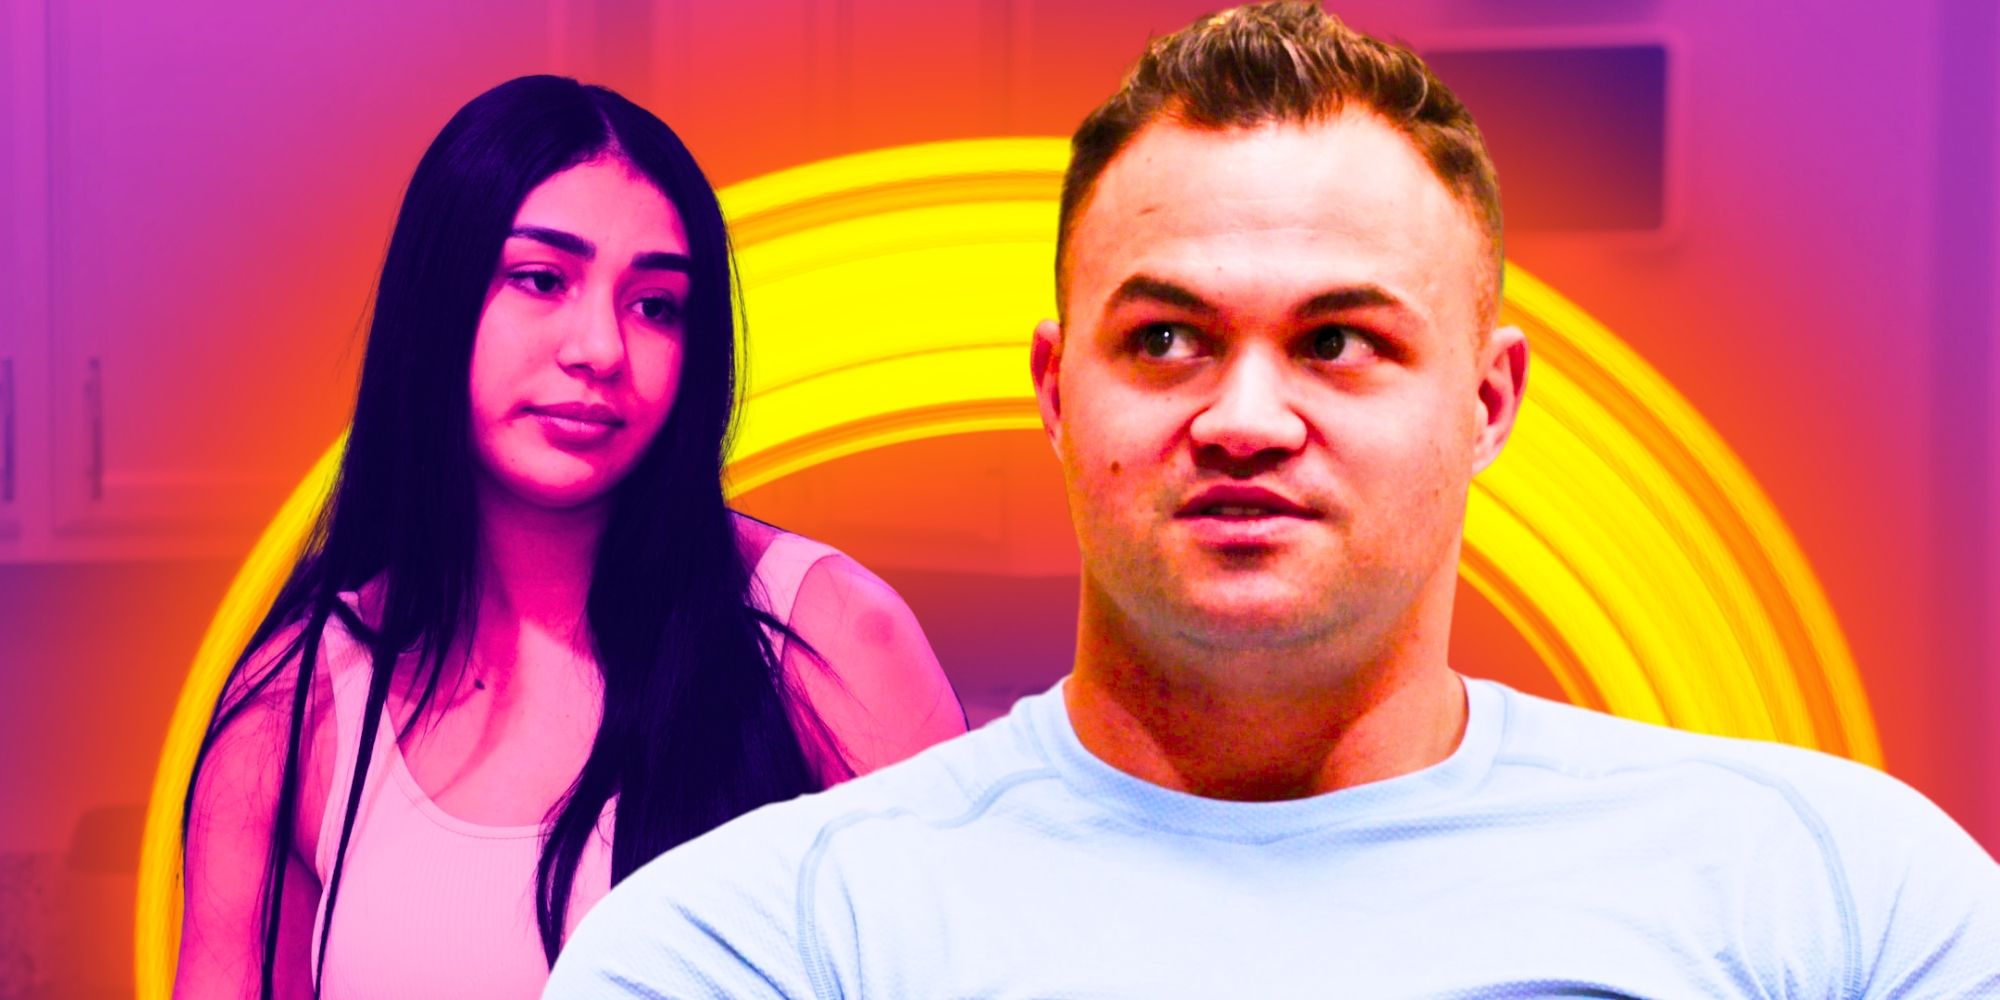 90 Day Fiance's Patrick & Thaís looking serious